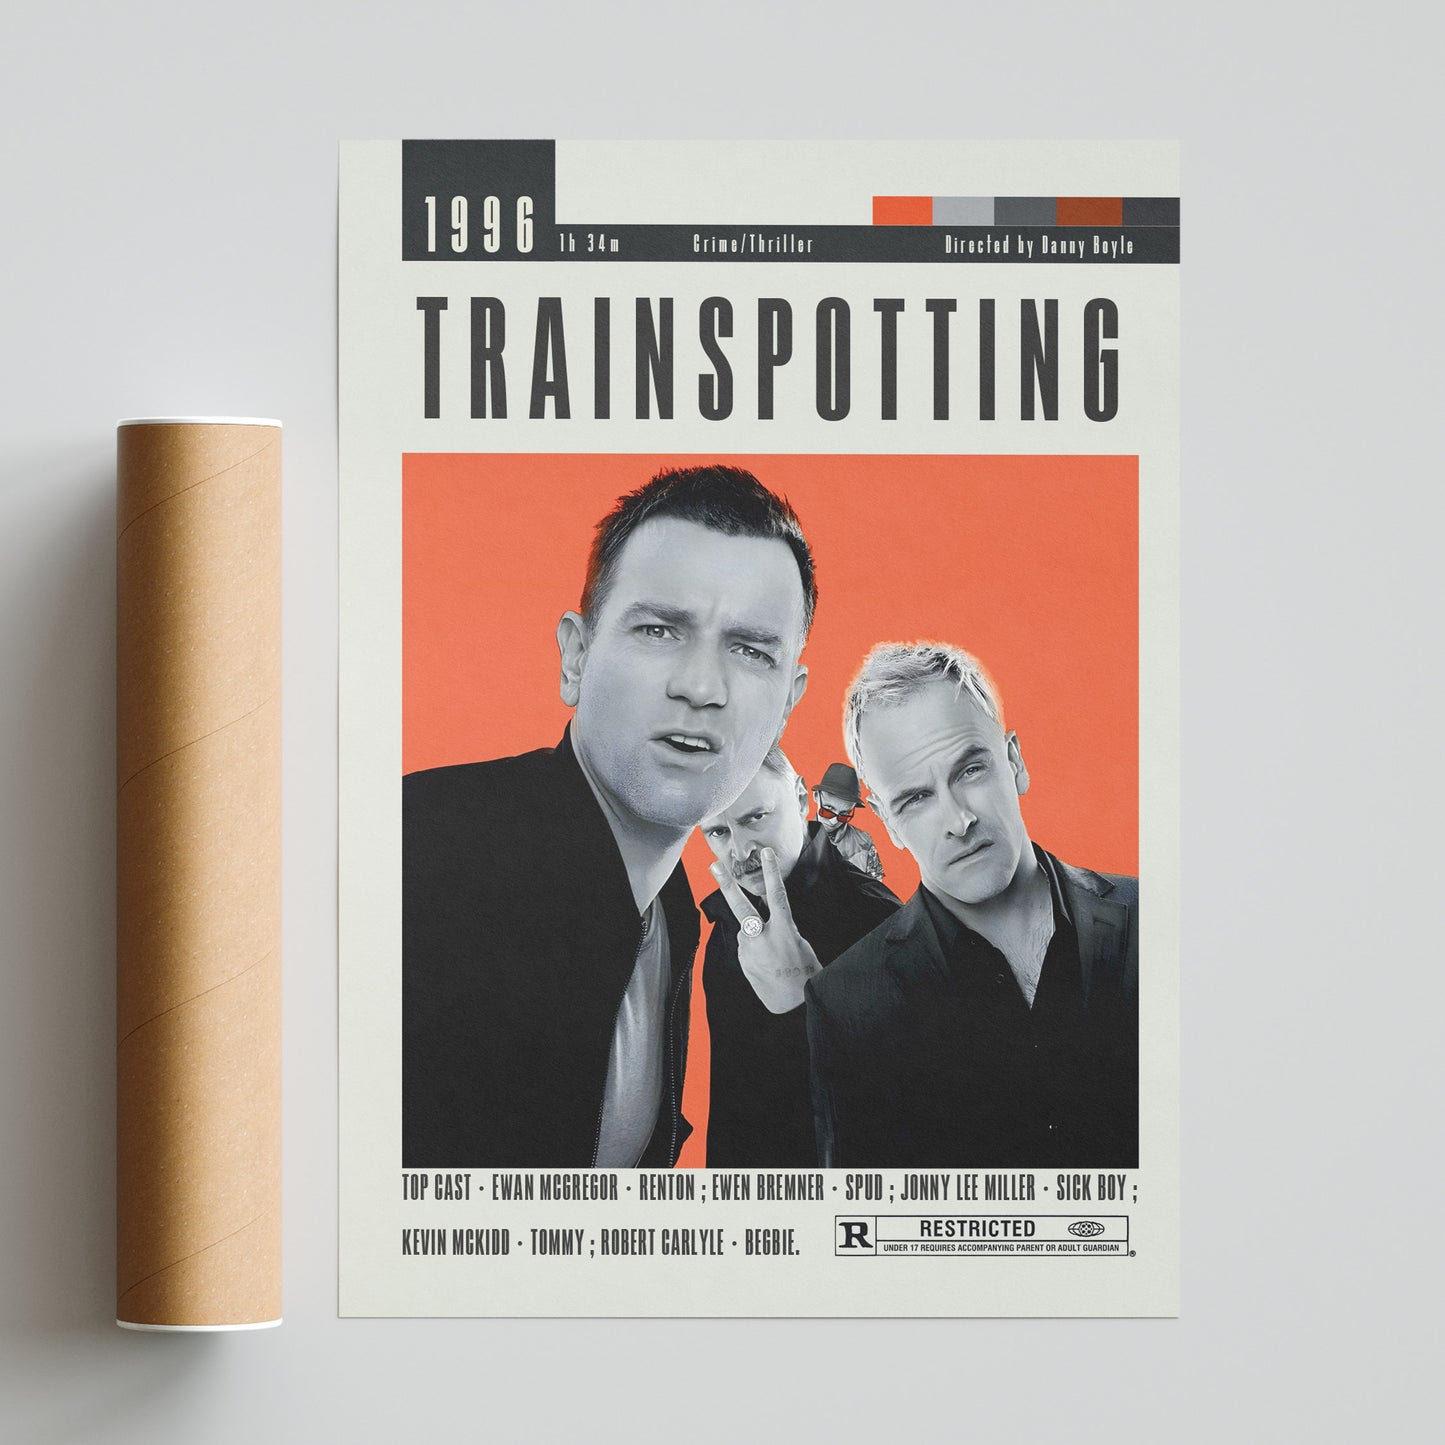 "Spruce up your wall with our Trainspotting Poster, showcasing unique handmade illustrations of your favorite Danny Boyle movie. With the best selection of movie posters and prints, it's the perfect gift for any film buff. Get yours now!"